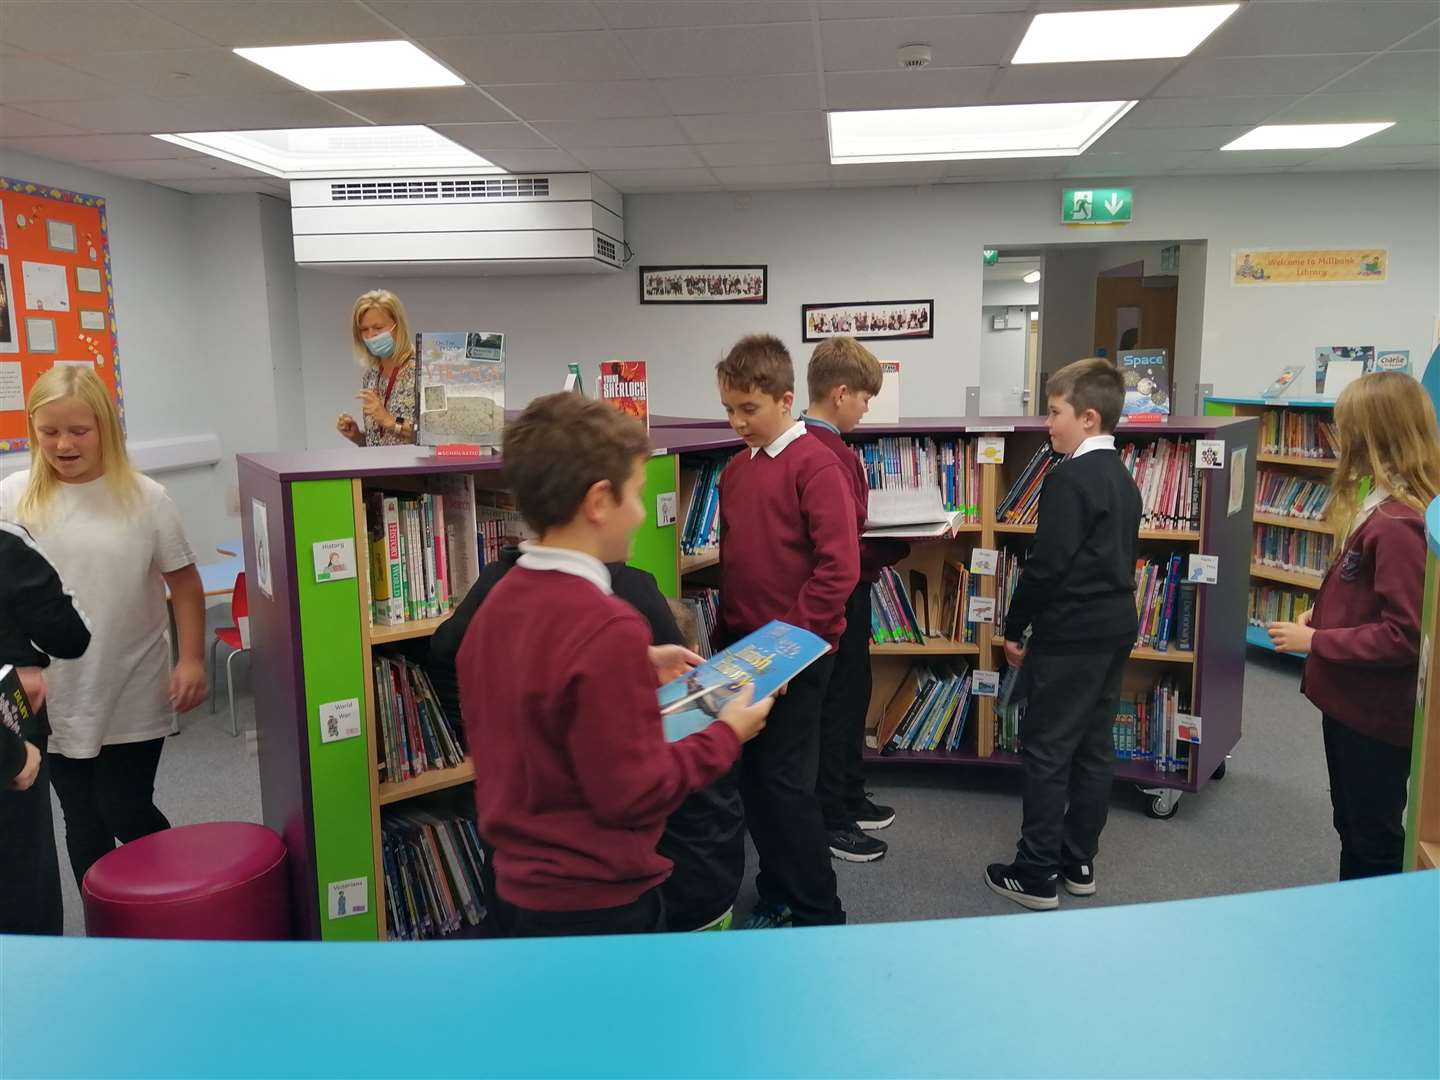 Millbank pupils explore the new look library.